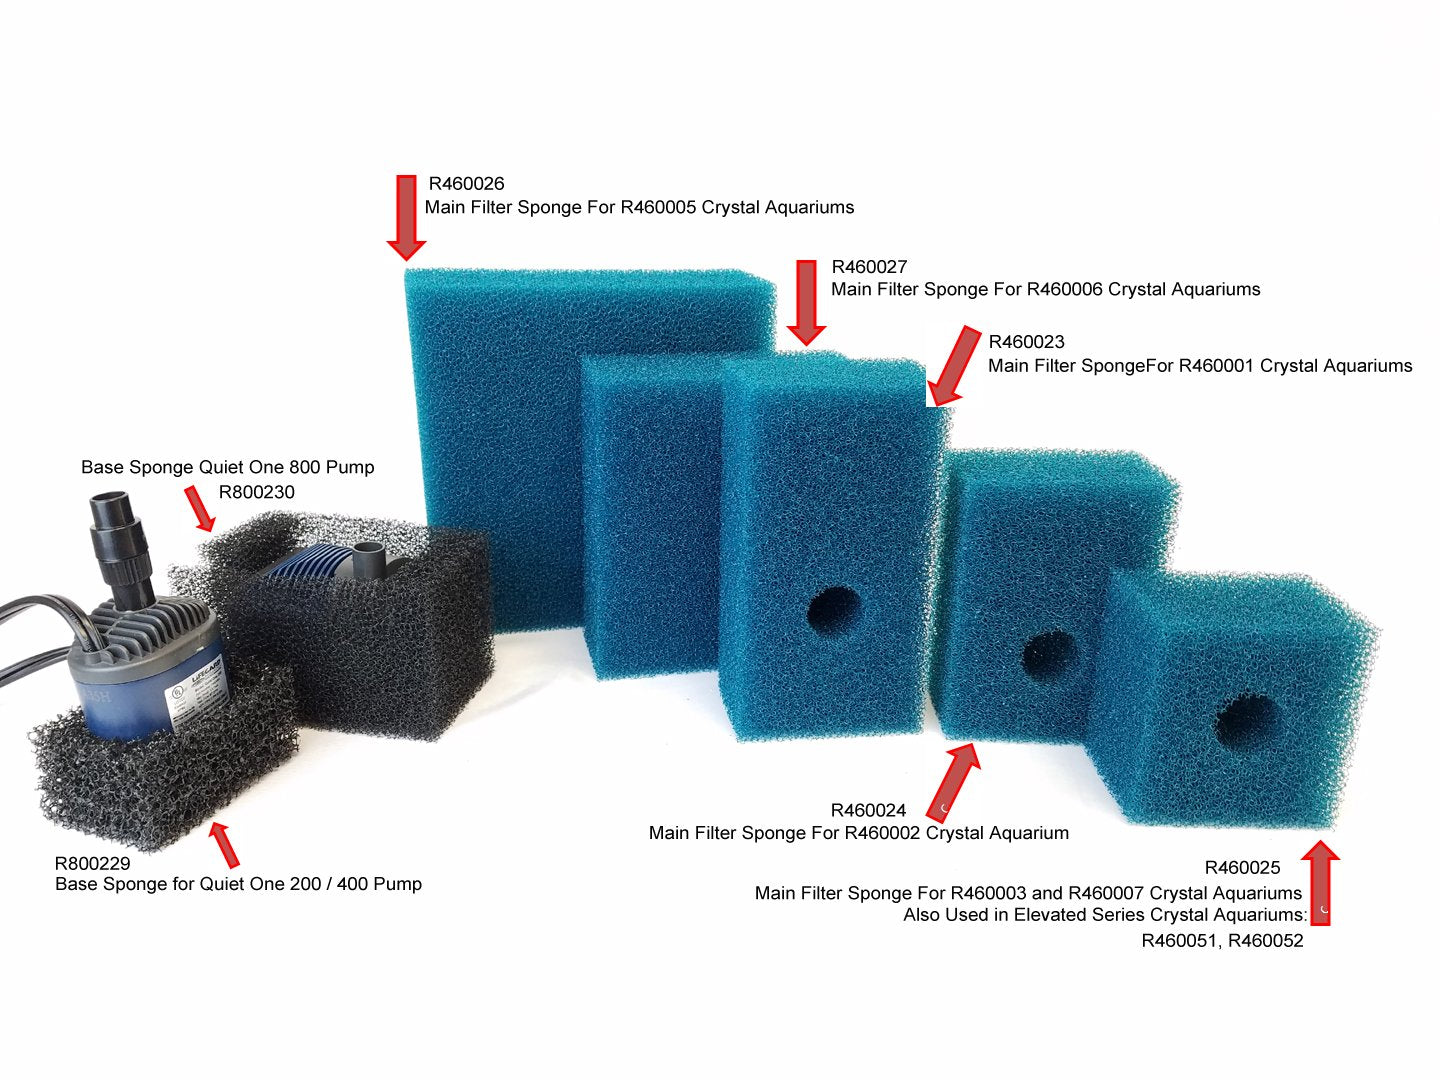 Mechanical Sponges for Crystal Aquarium with Built in Back Filter (24.09 gallons)